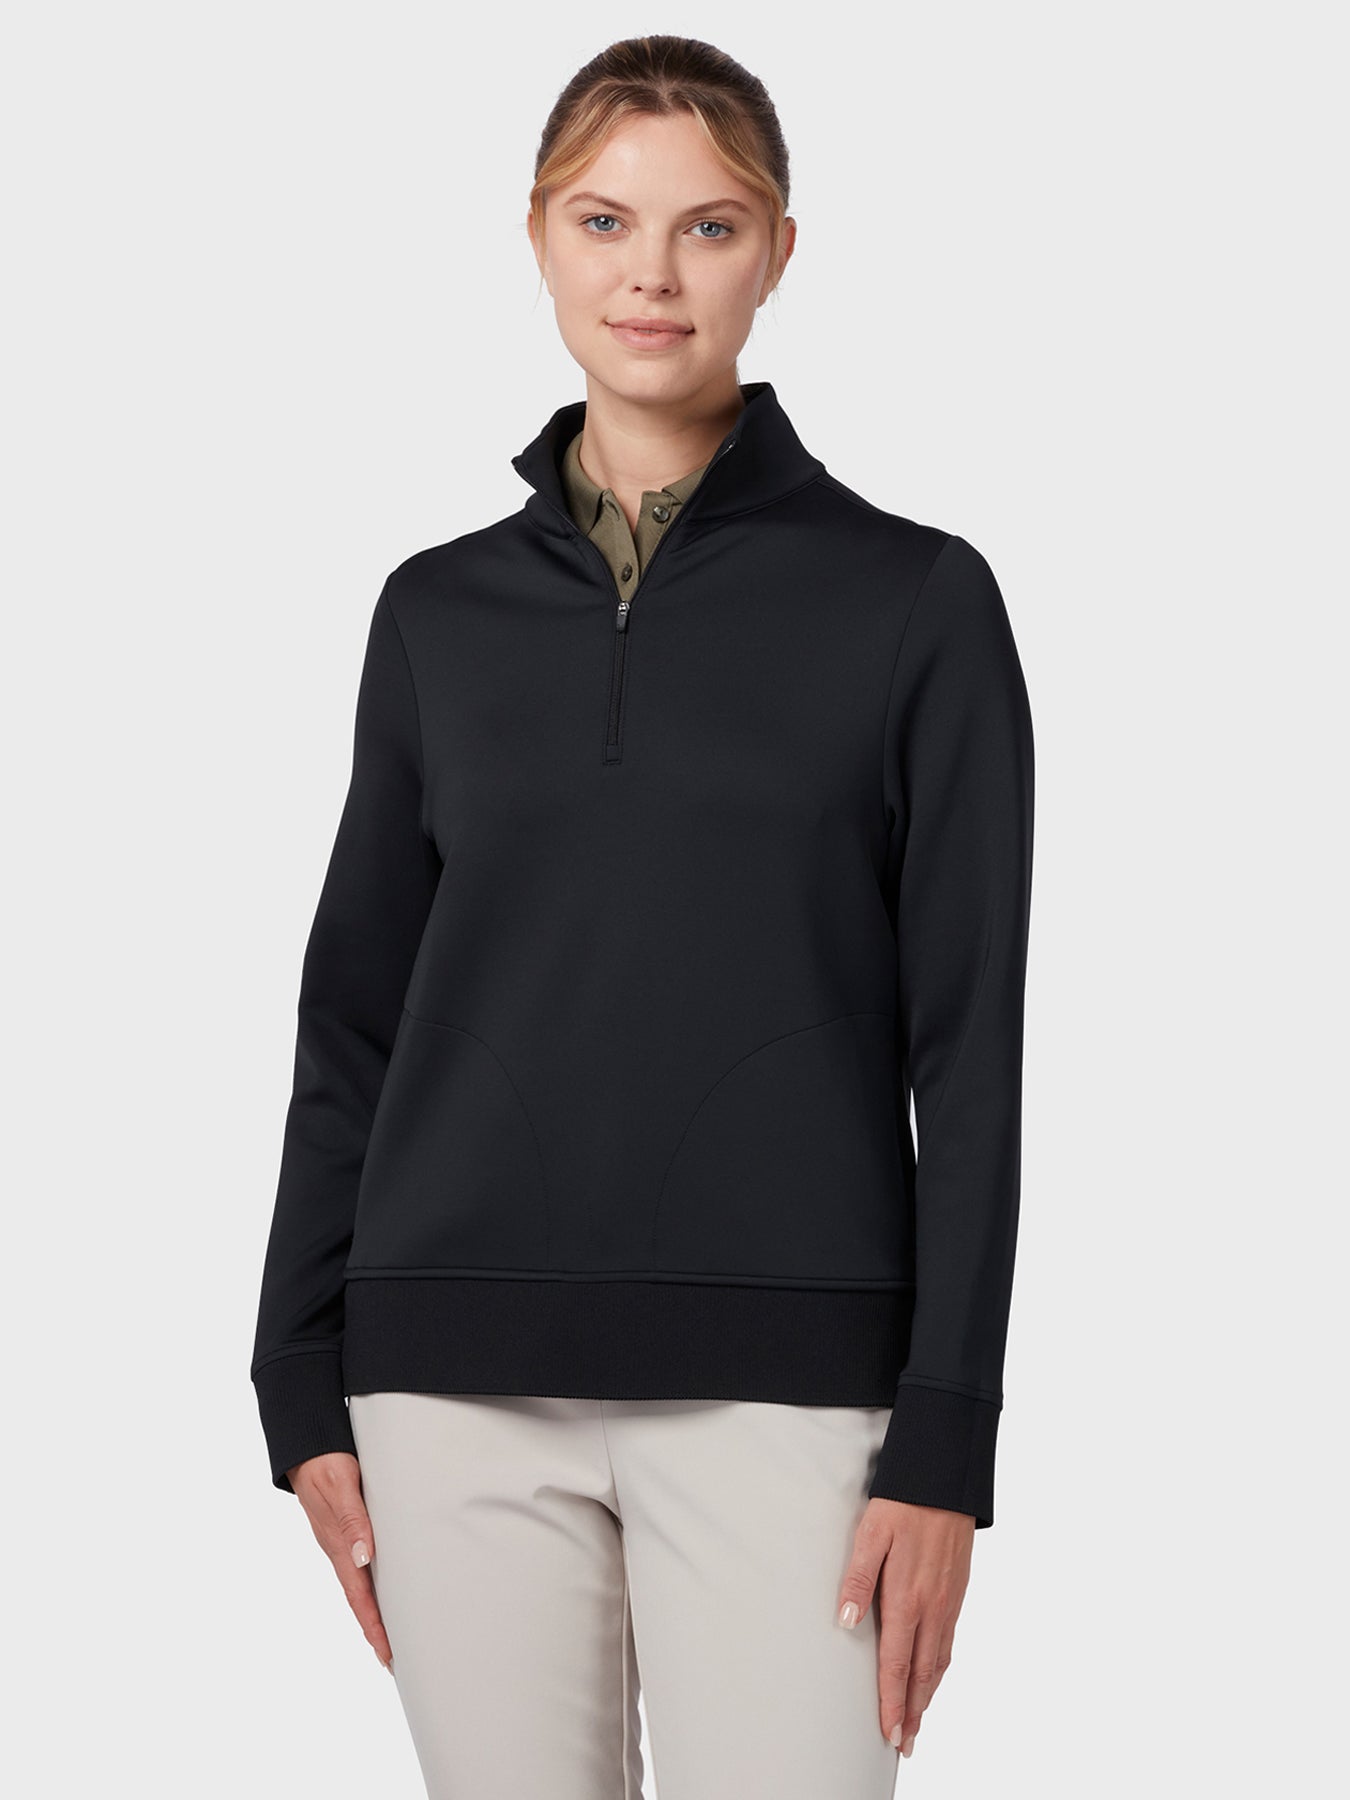 View Midweight Womens Fleece Crossover In Caviar Caviar S information